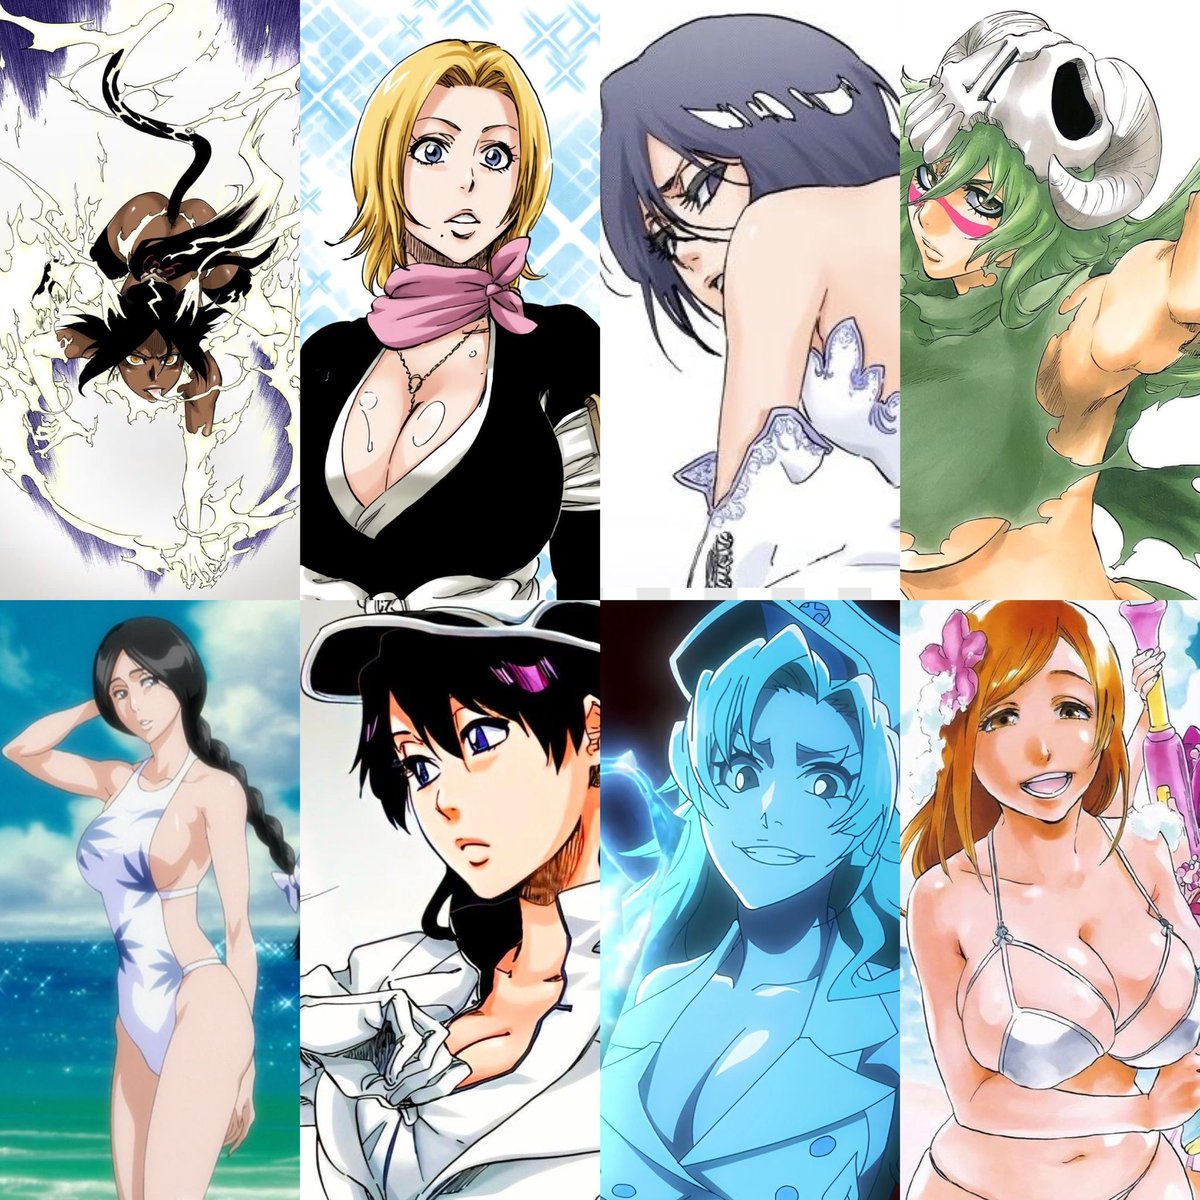 who’s the hottest out of these bleach girls?